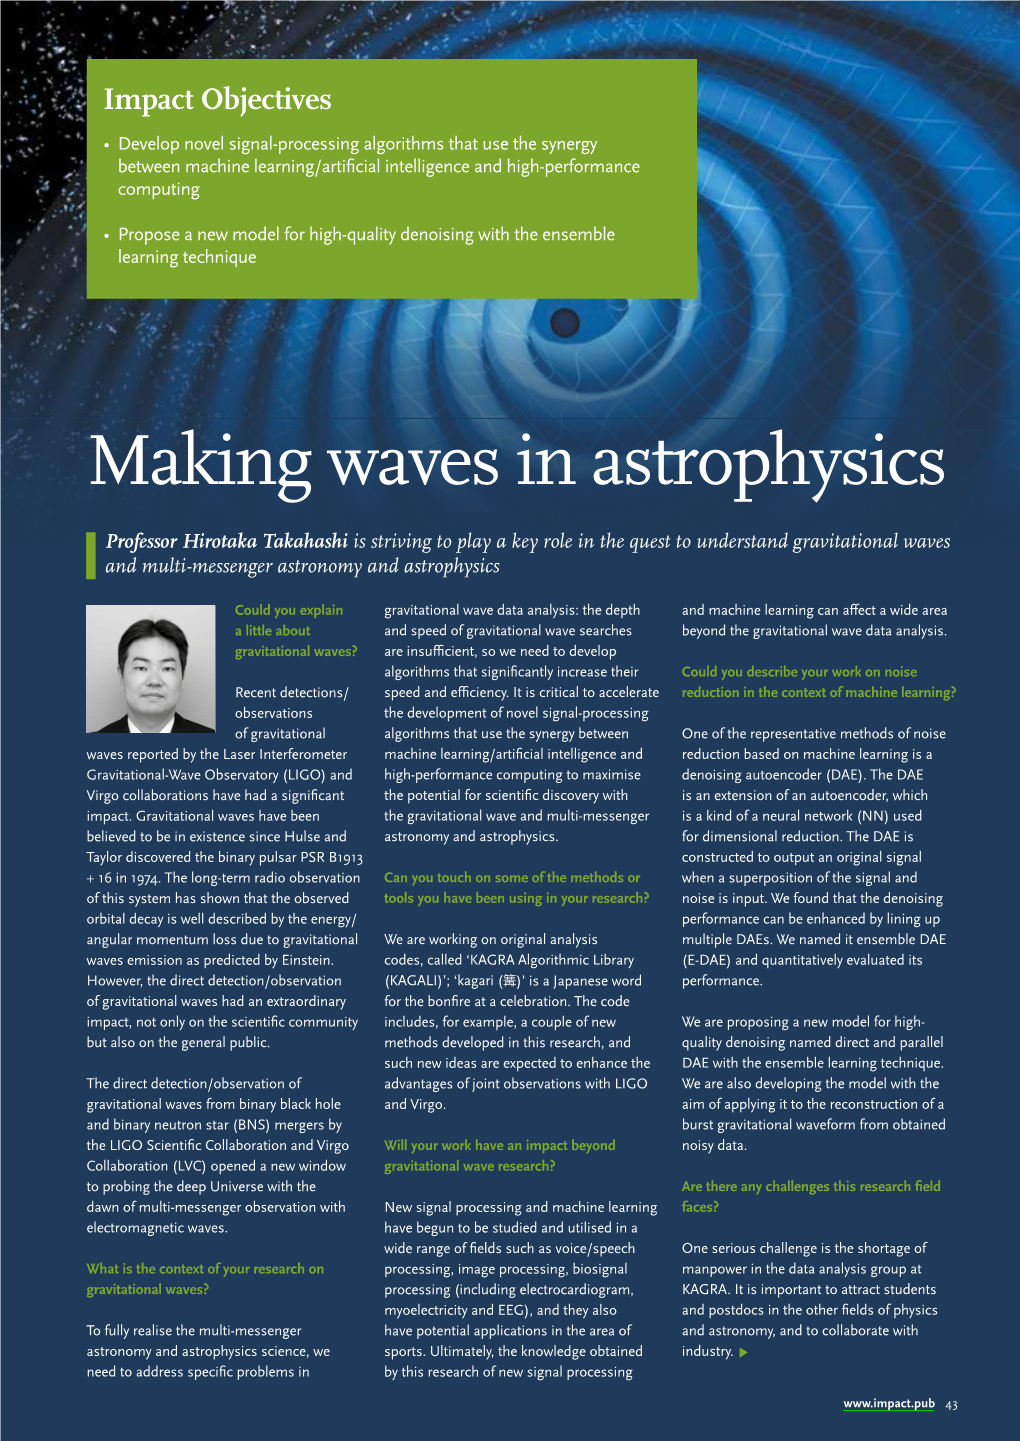 Method of Gravitational Wave Search Based on Adaptive Time-Frequency